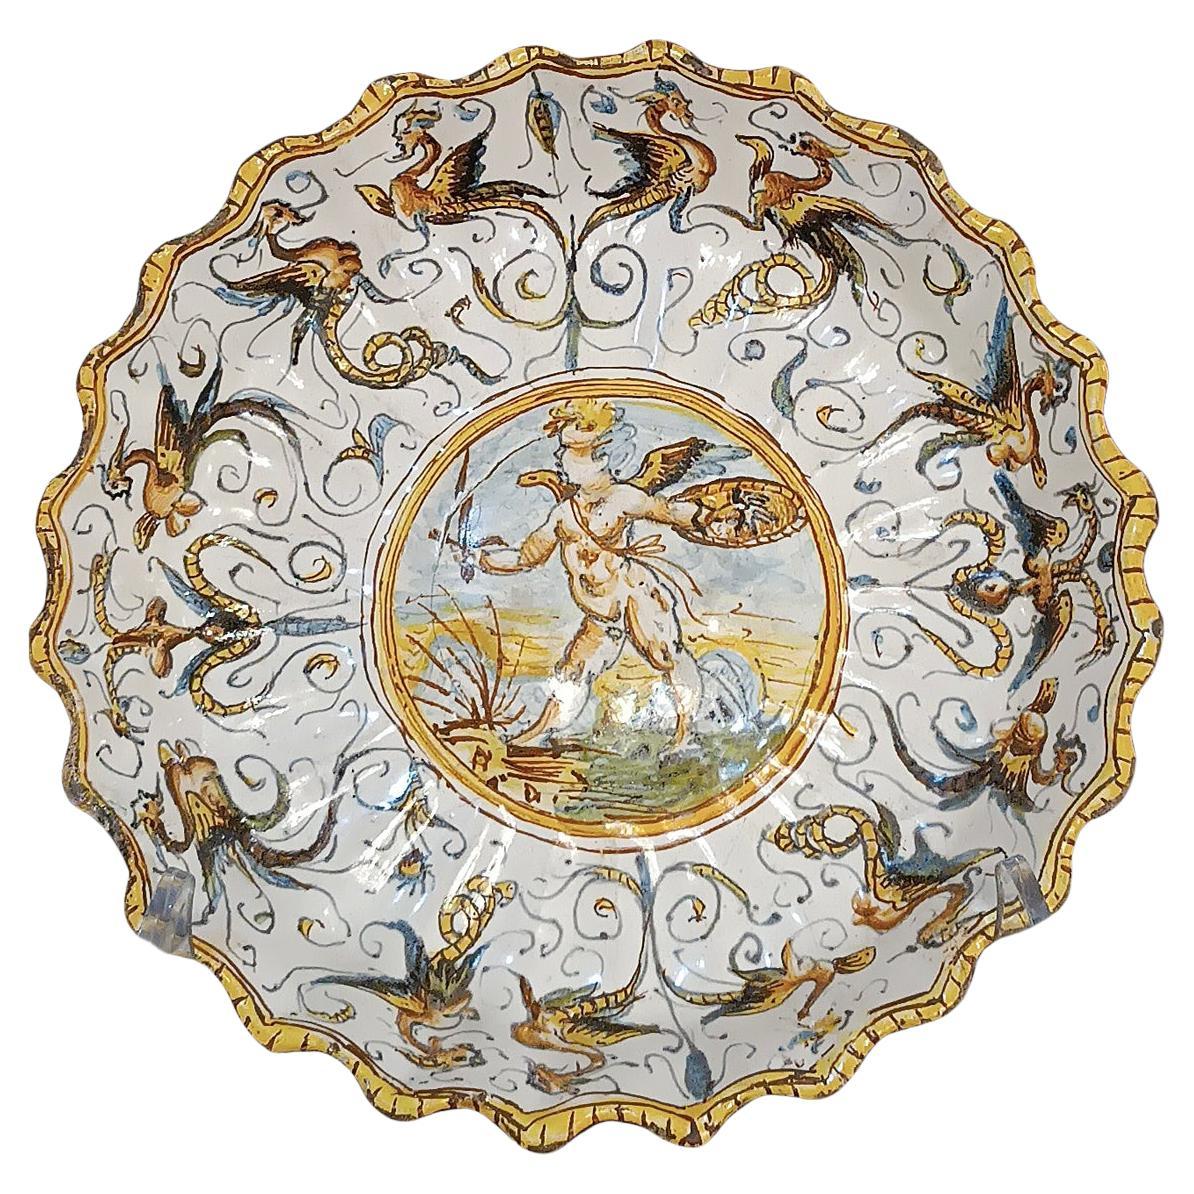 SECOND HALF OF THE 16th CENTURY POLYCHROME MAIOLICA PLATE  For Sale